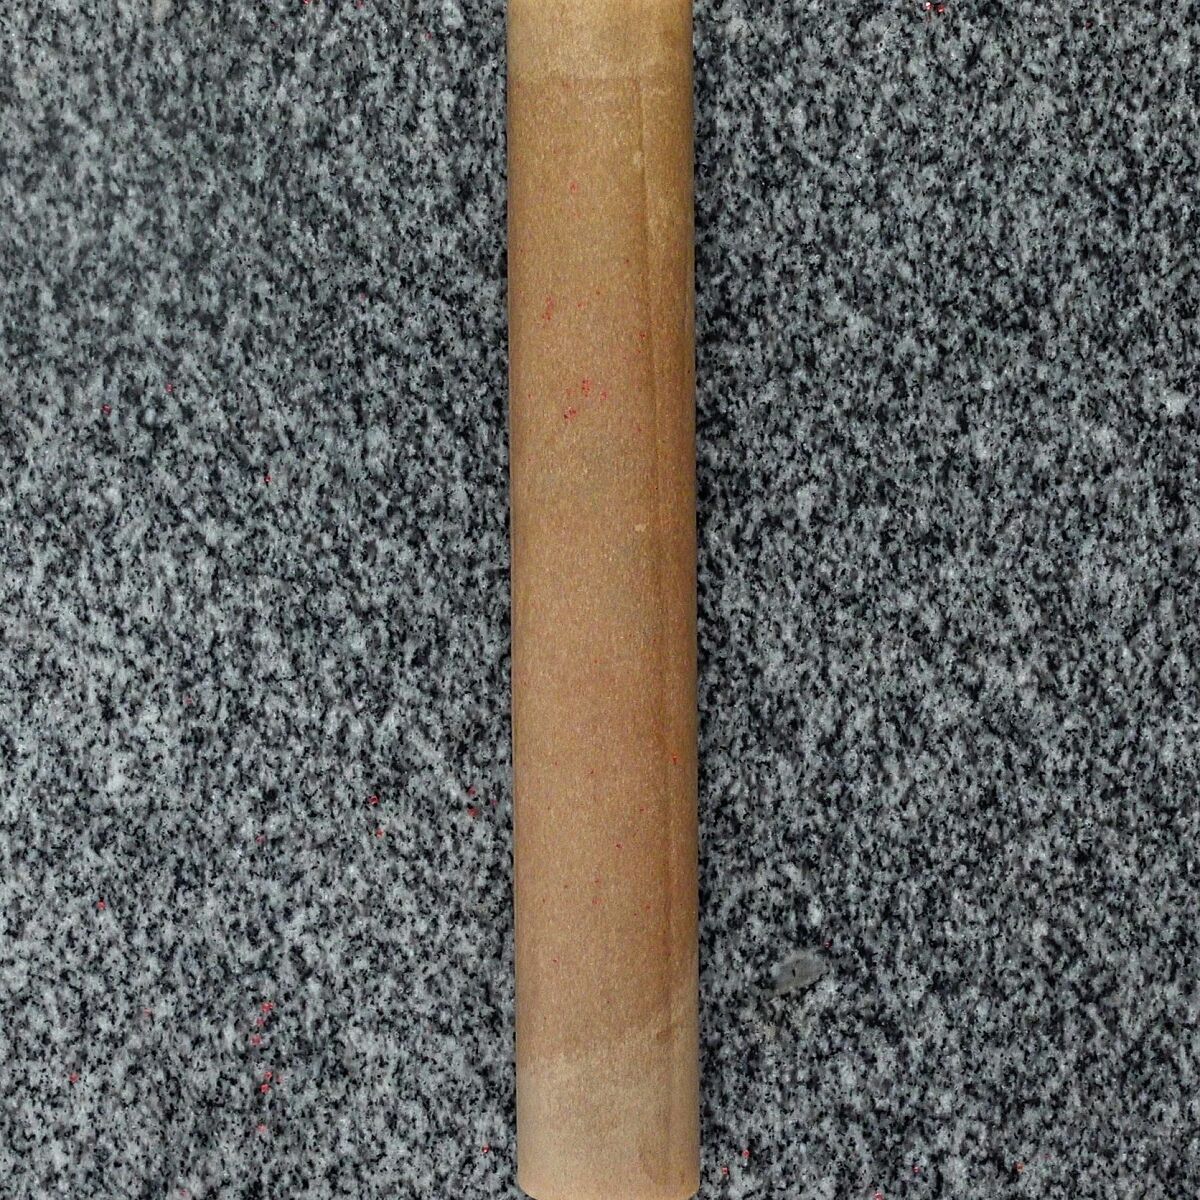 log of dough rolled up in parchment paper.